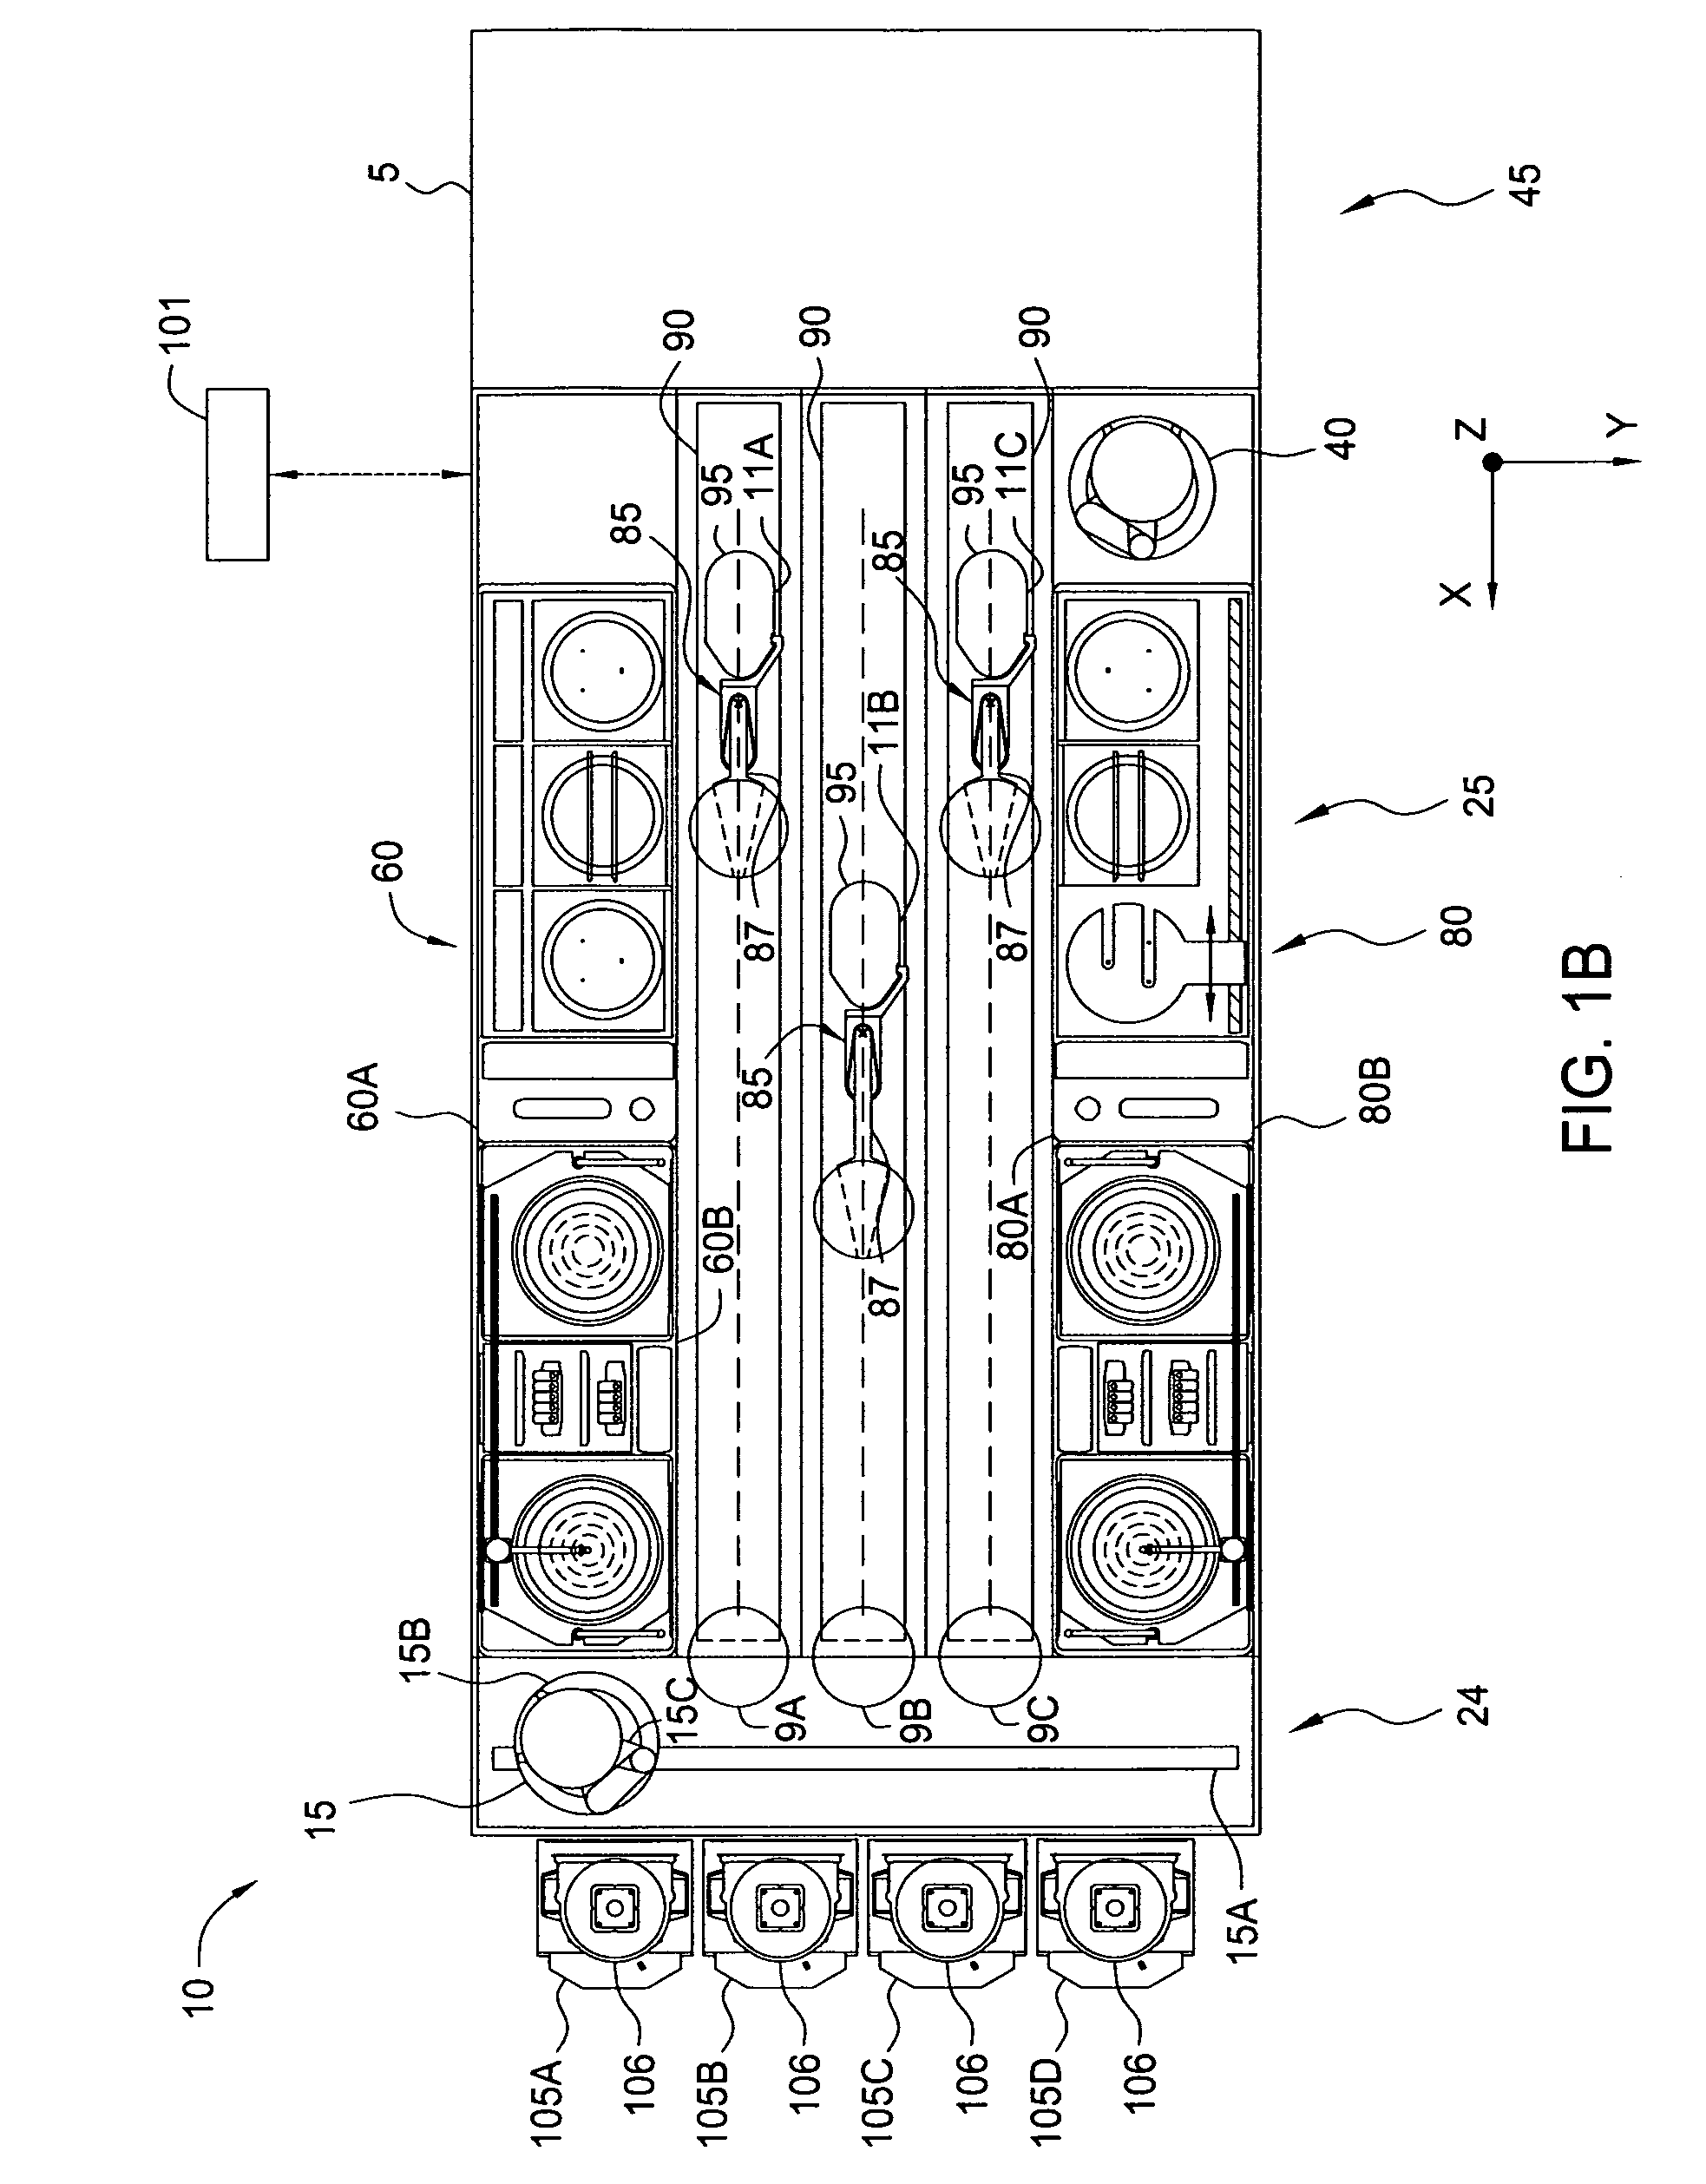 Substrate gripper for a substrate handling robot